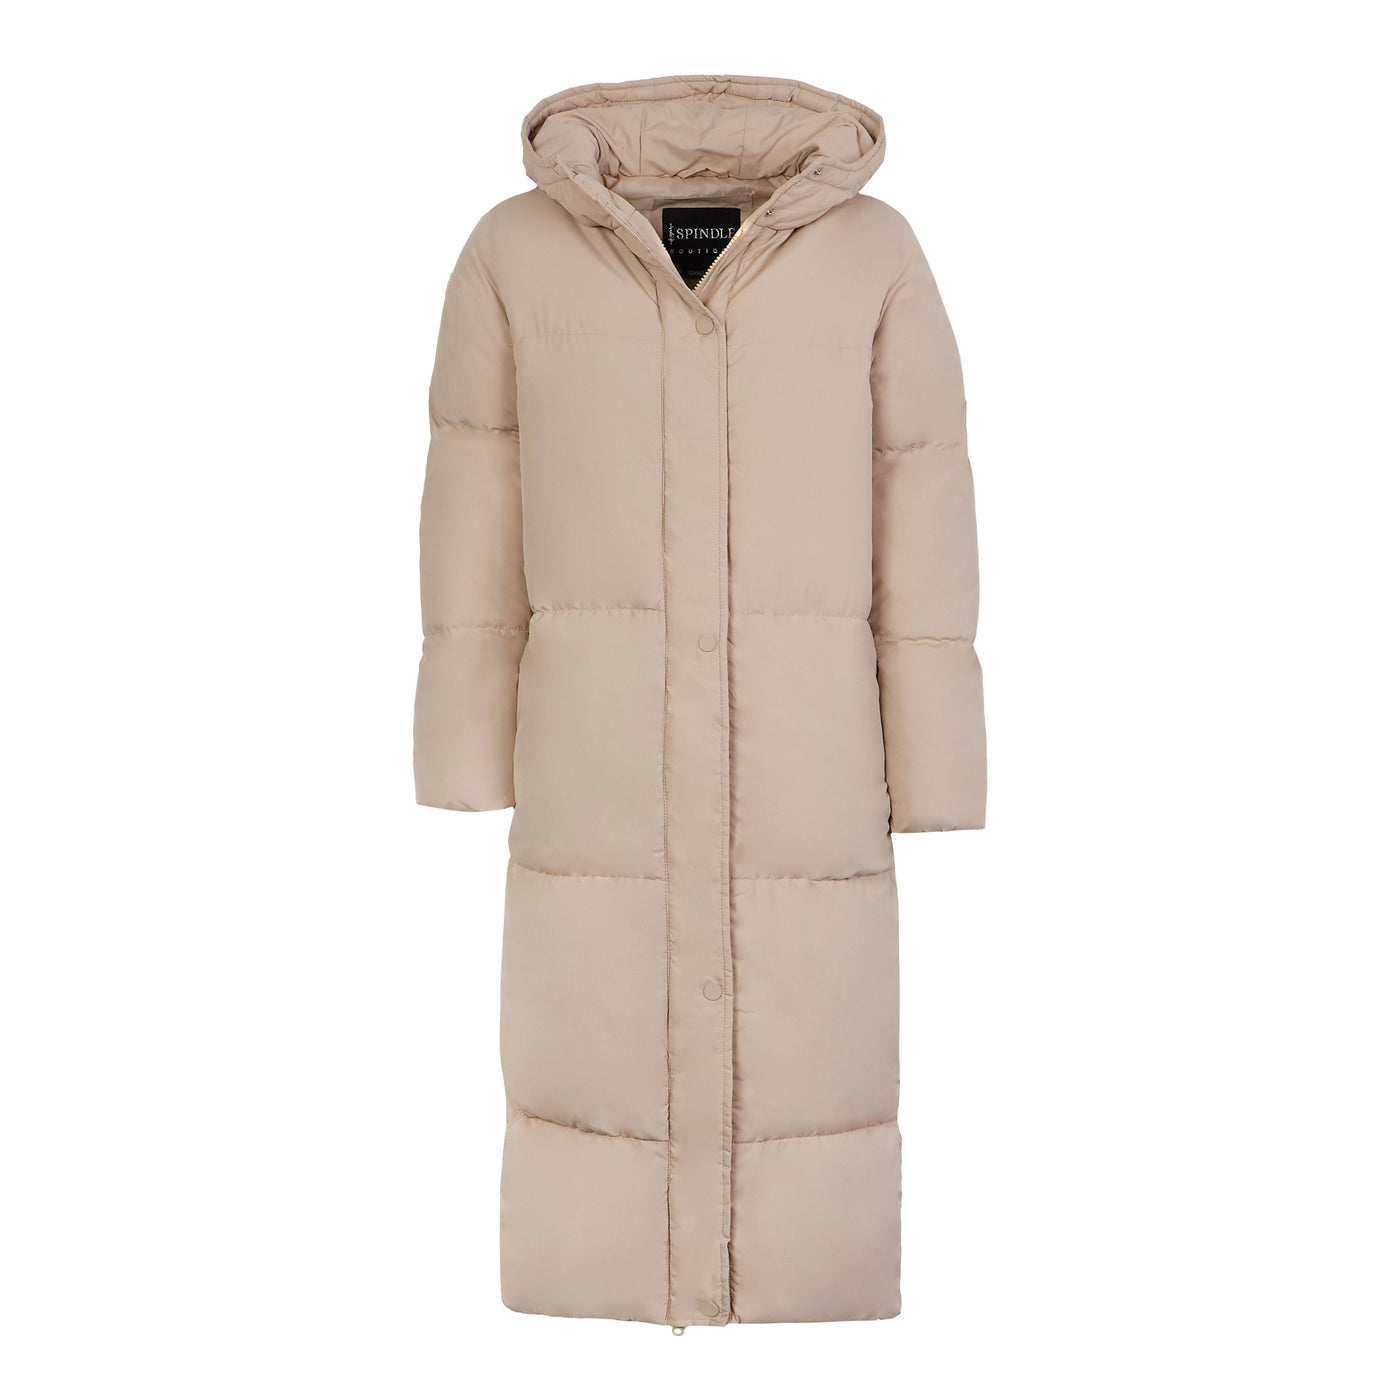 Spindle Womens Maxi Long Hooded Puffer Quilted Parka Coat Extra Long | Ladies Full Length Winter Jacket with Hood